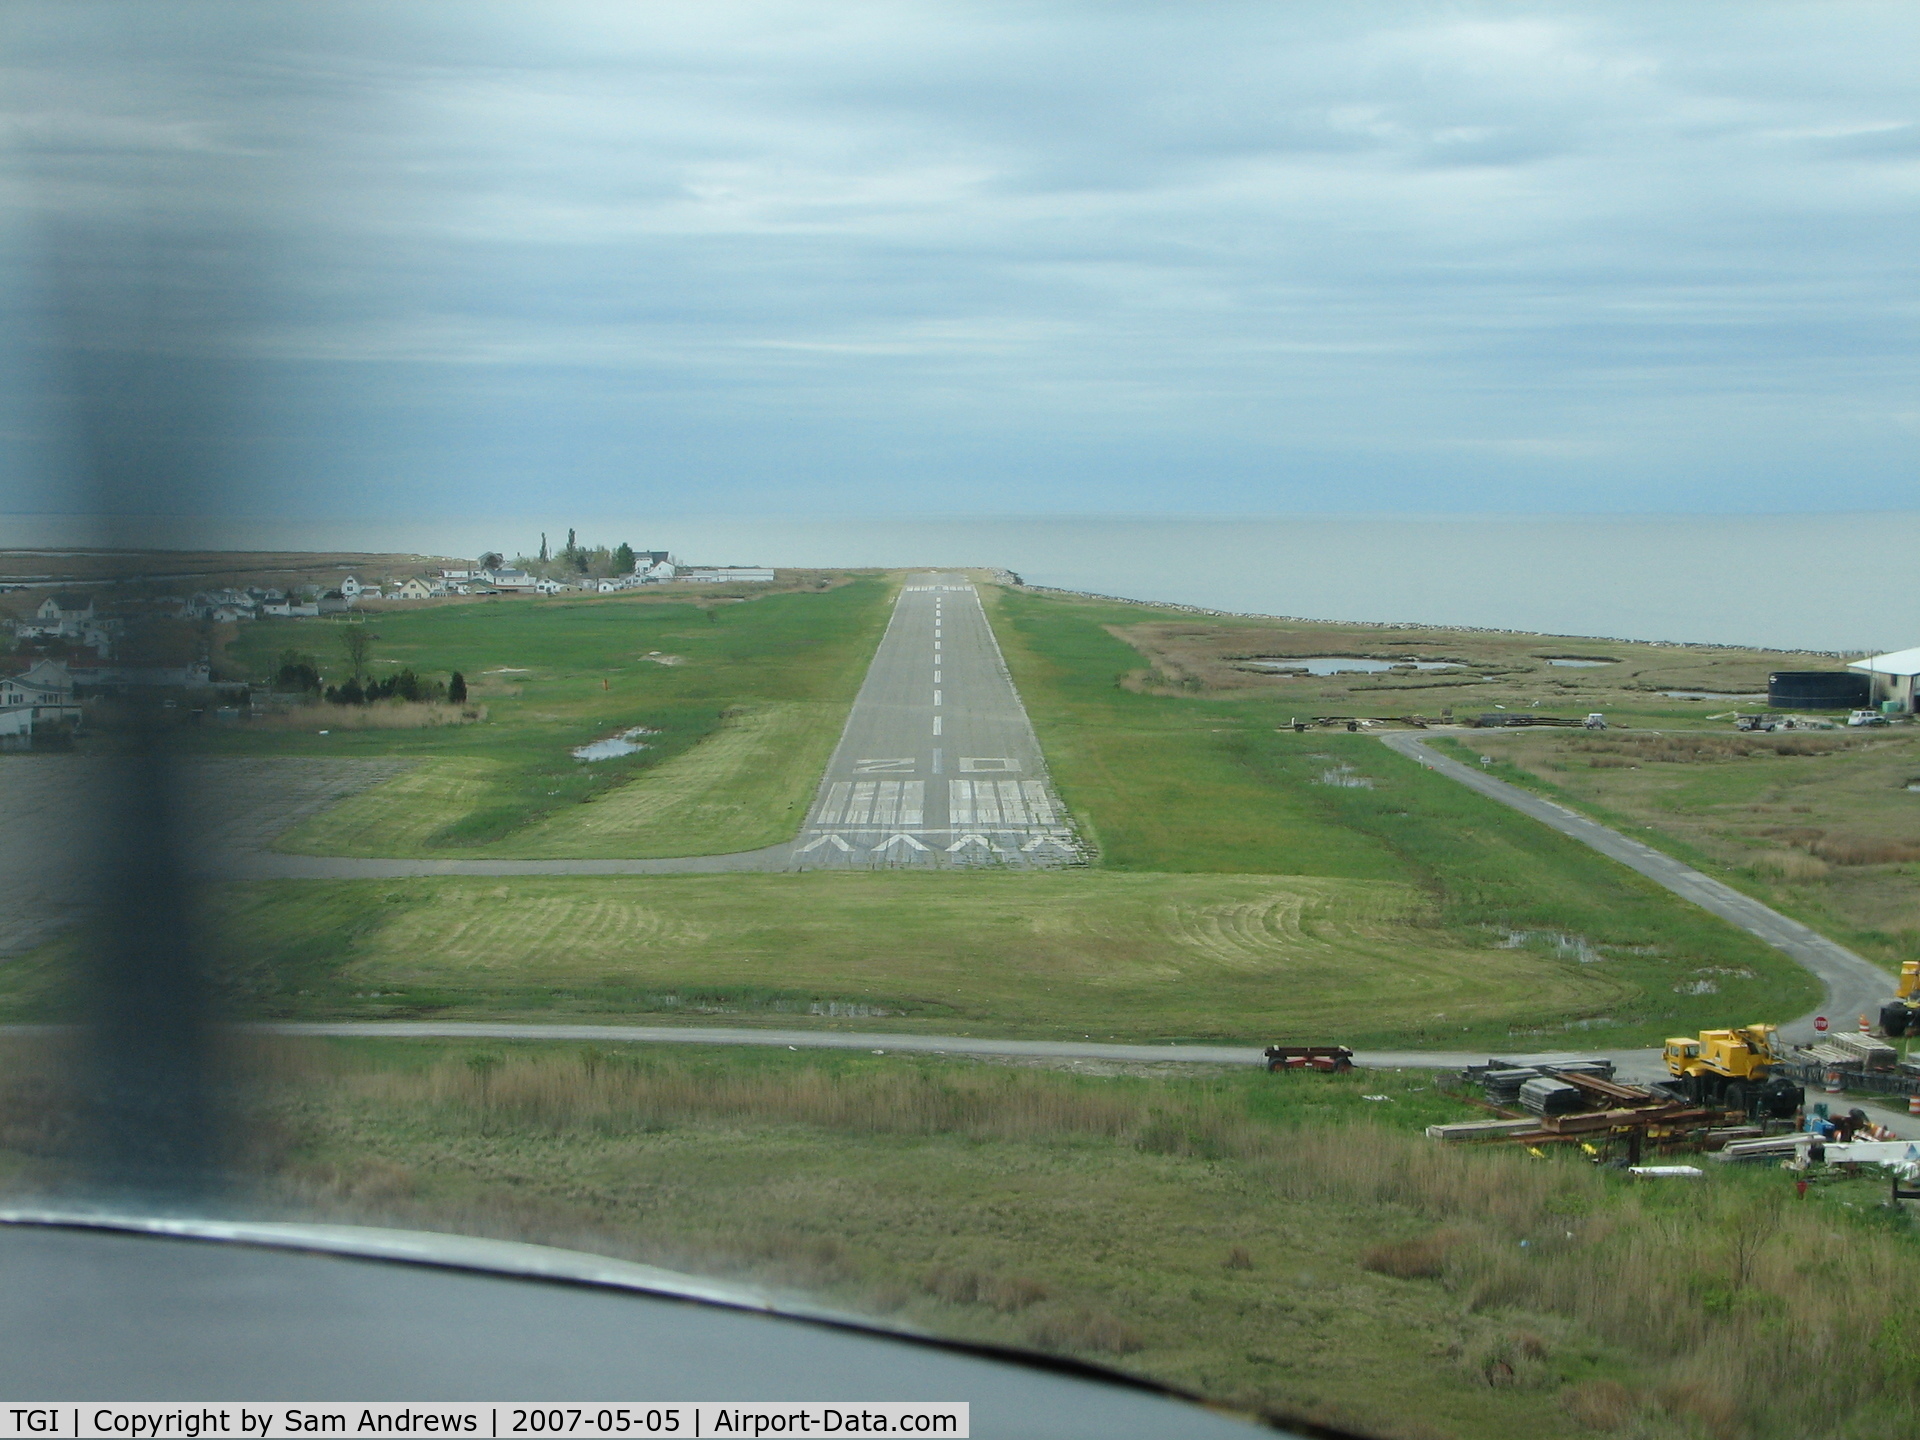 Tangier Island Airport (TGI) - The famous hump is at about the 5th center line stripe.